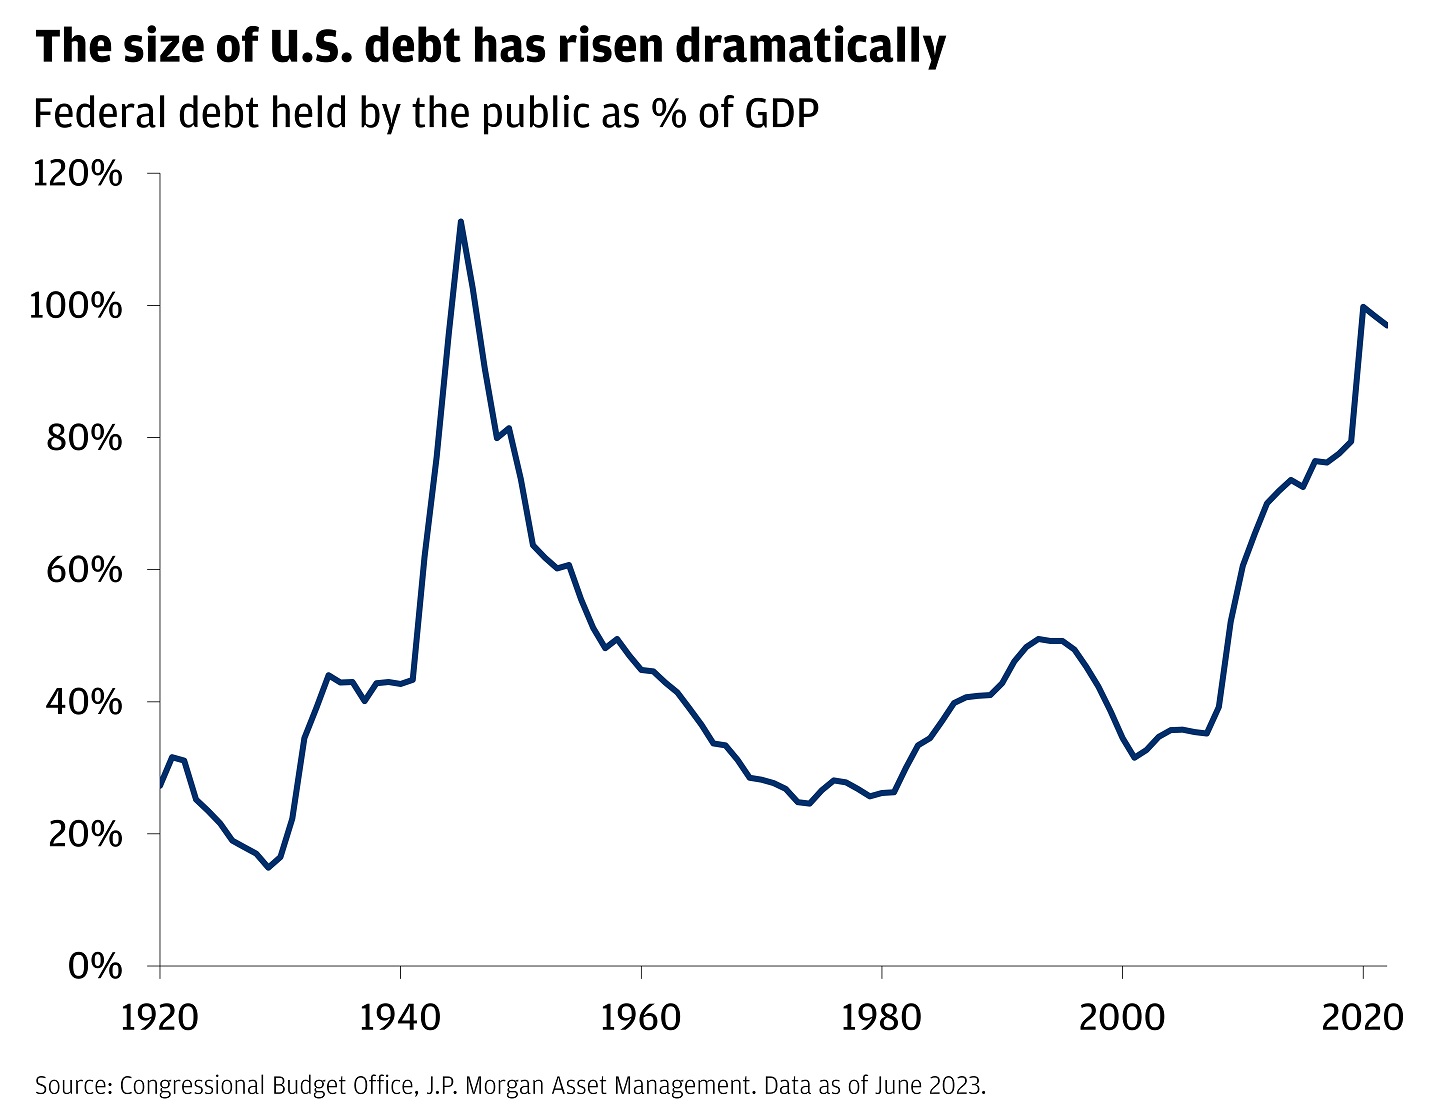 The chart describes the size of U.S. debt since 1920.